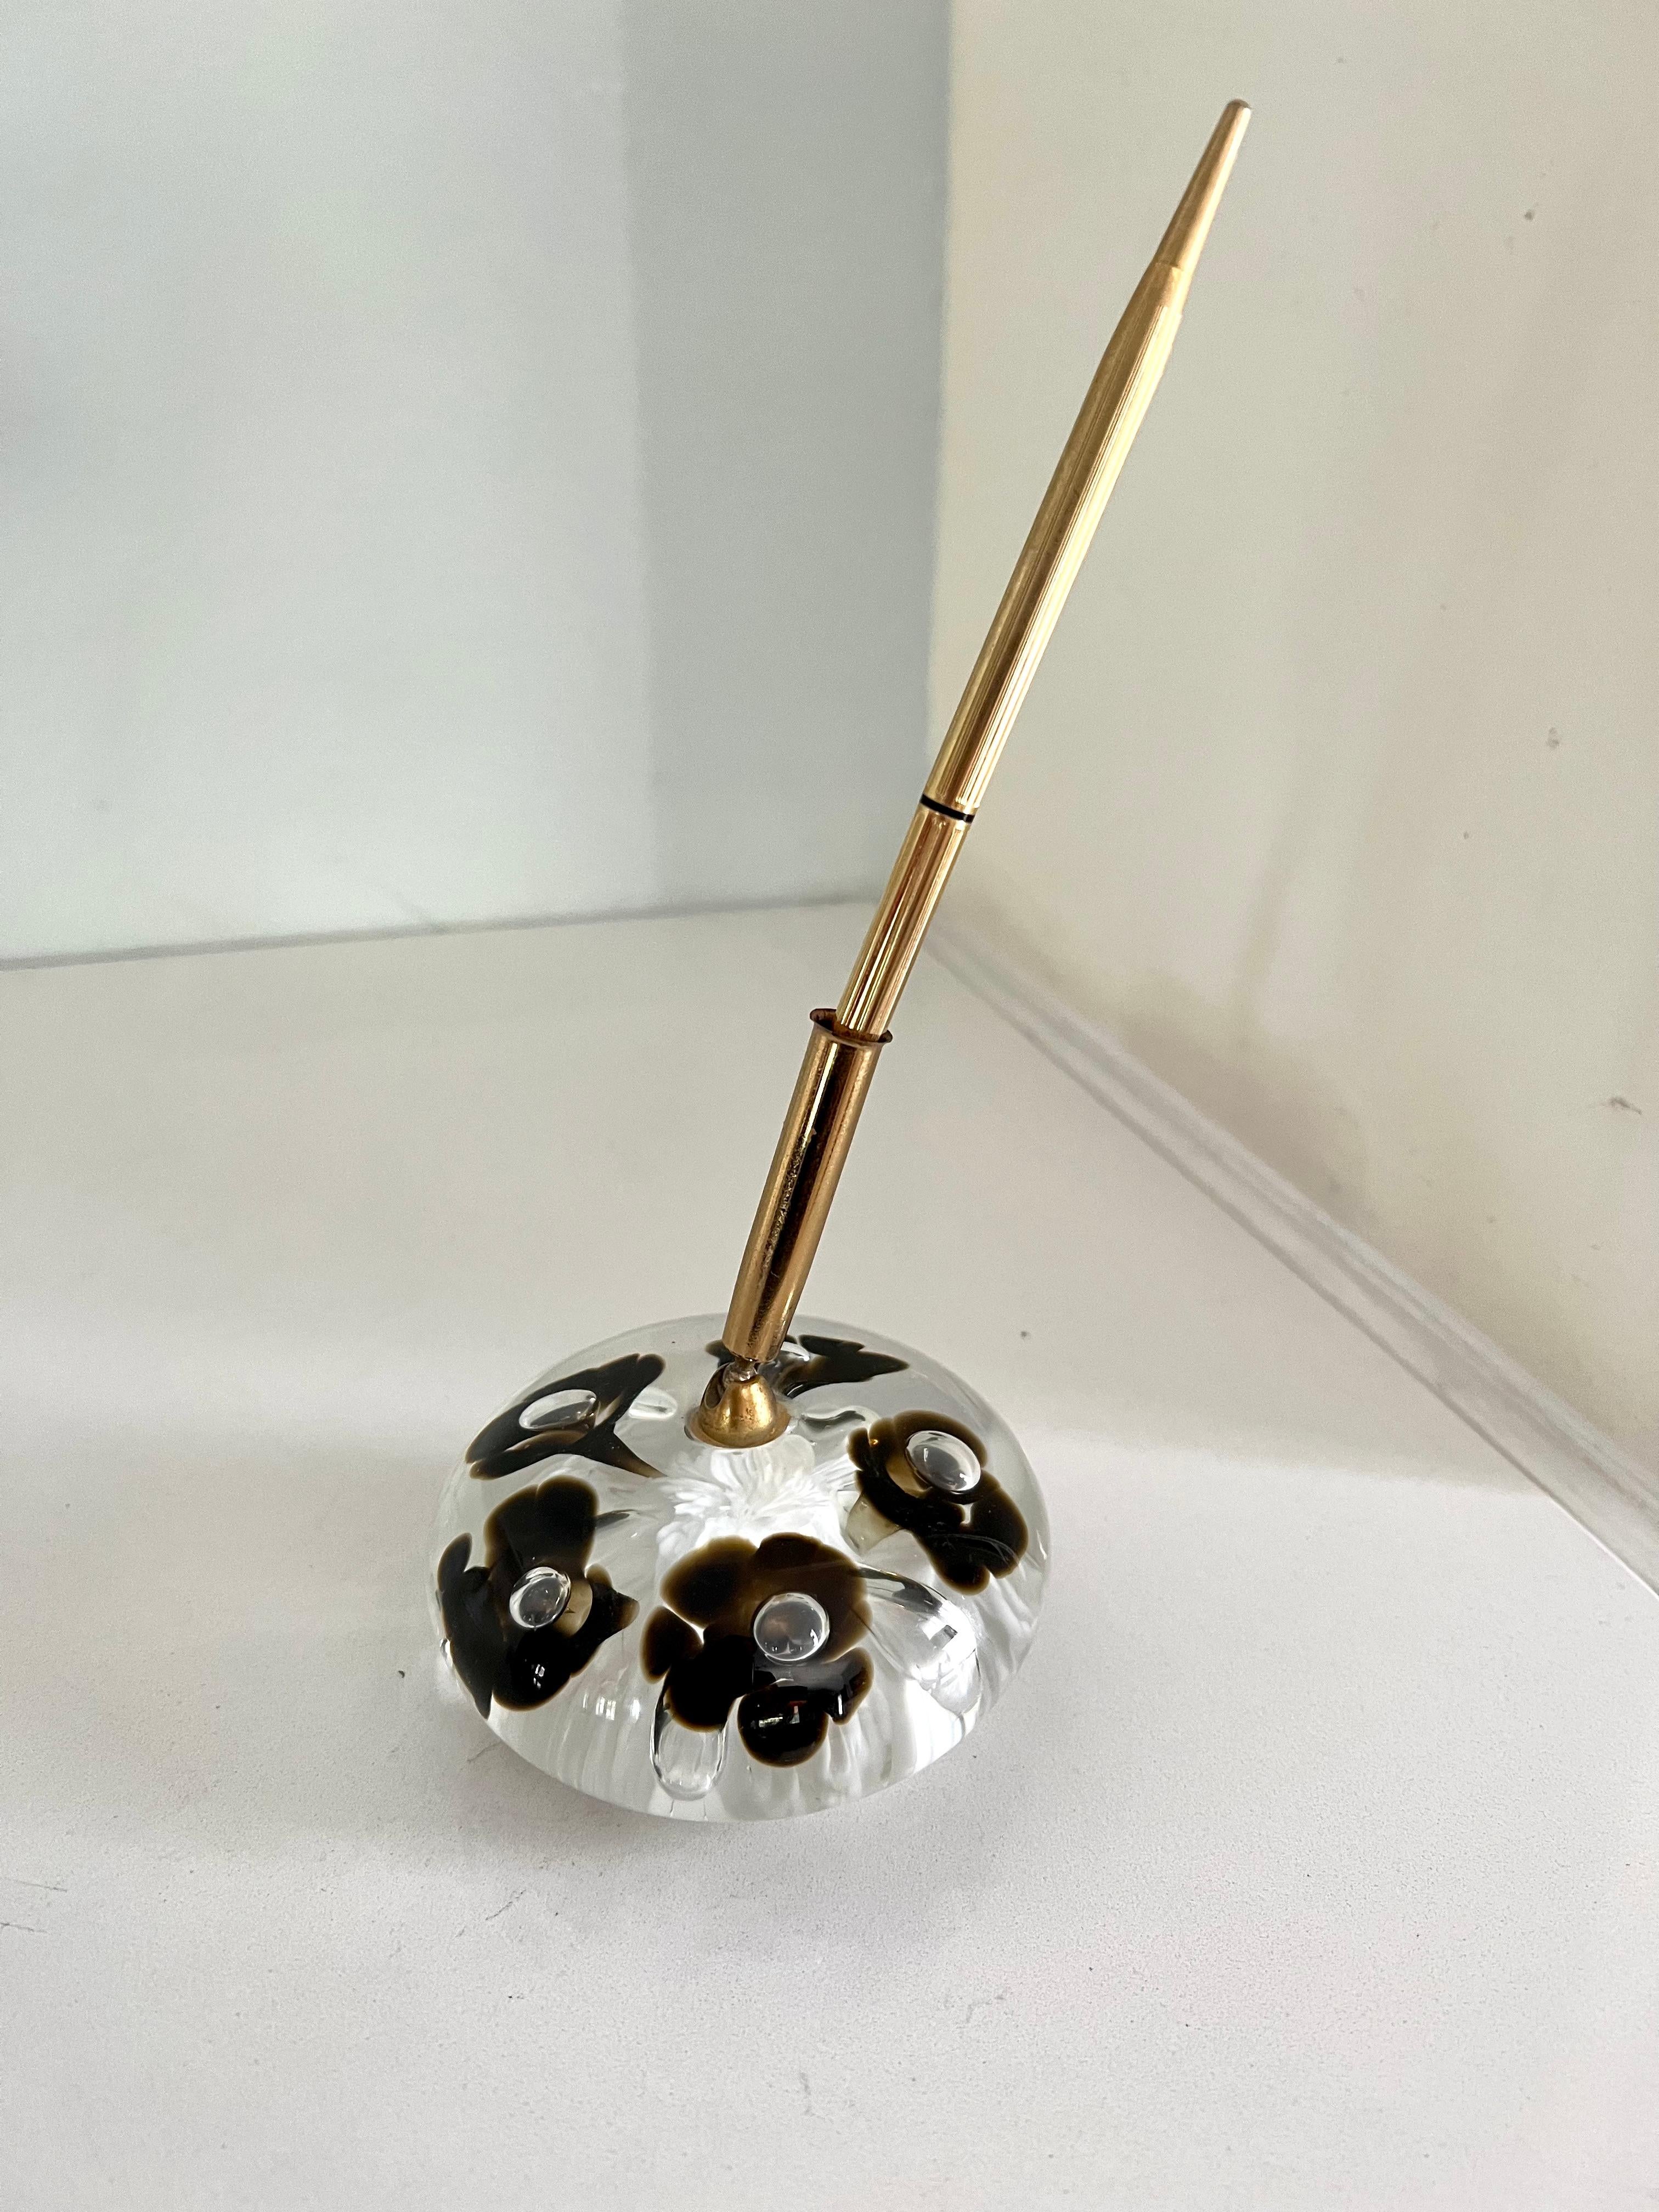 A beautiful glass paper weight with dark flowers encased - a holder for a lovely ribbed gold pen. The piece is great for any work station or well appointed desk.